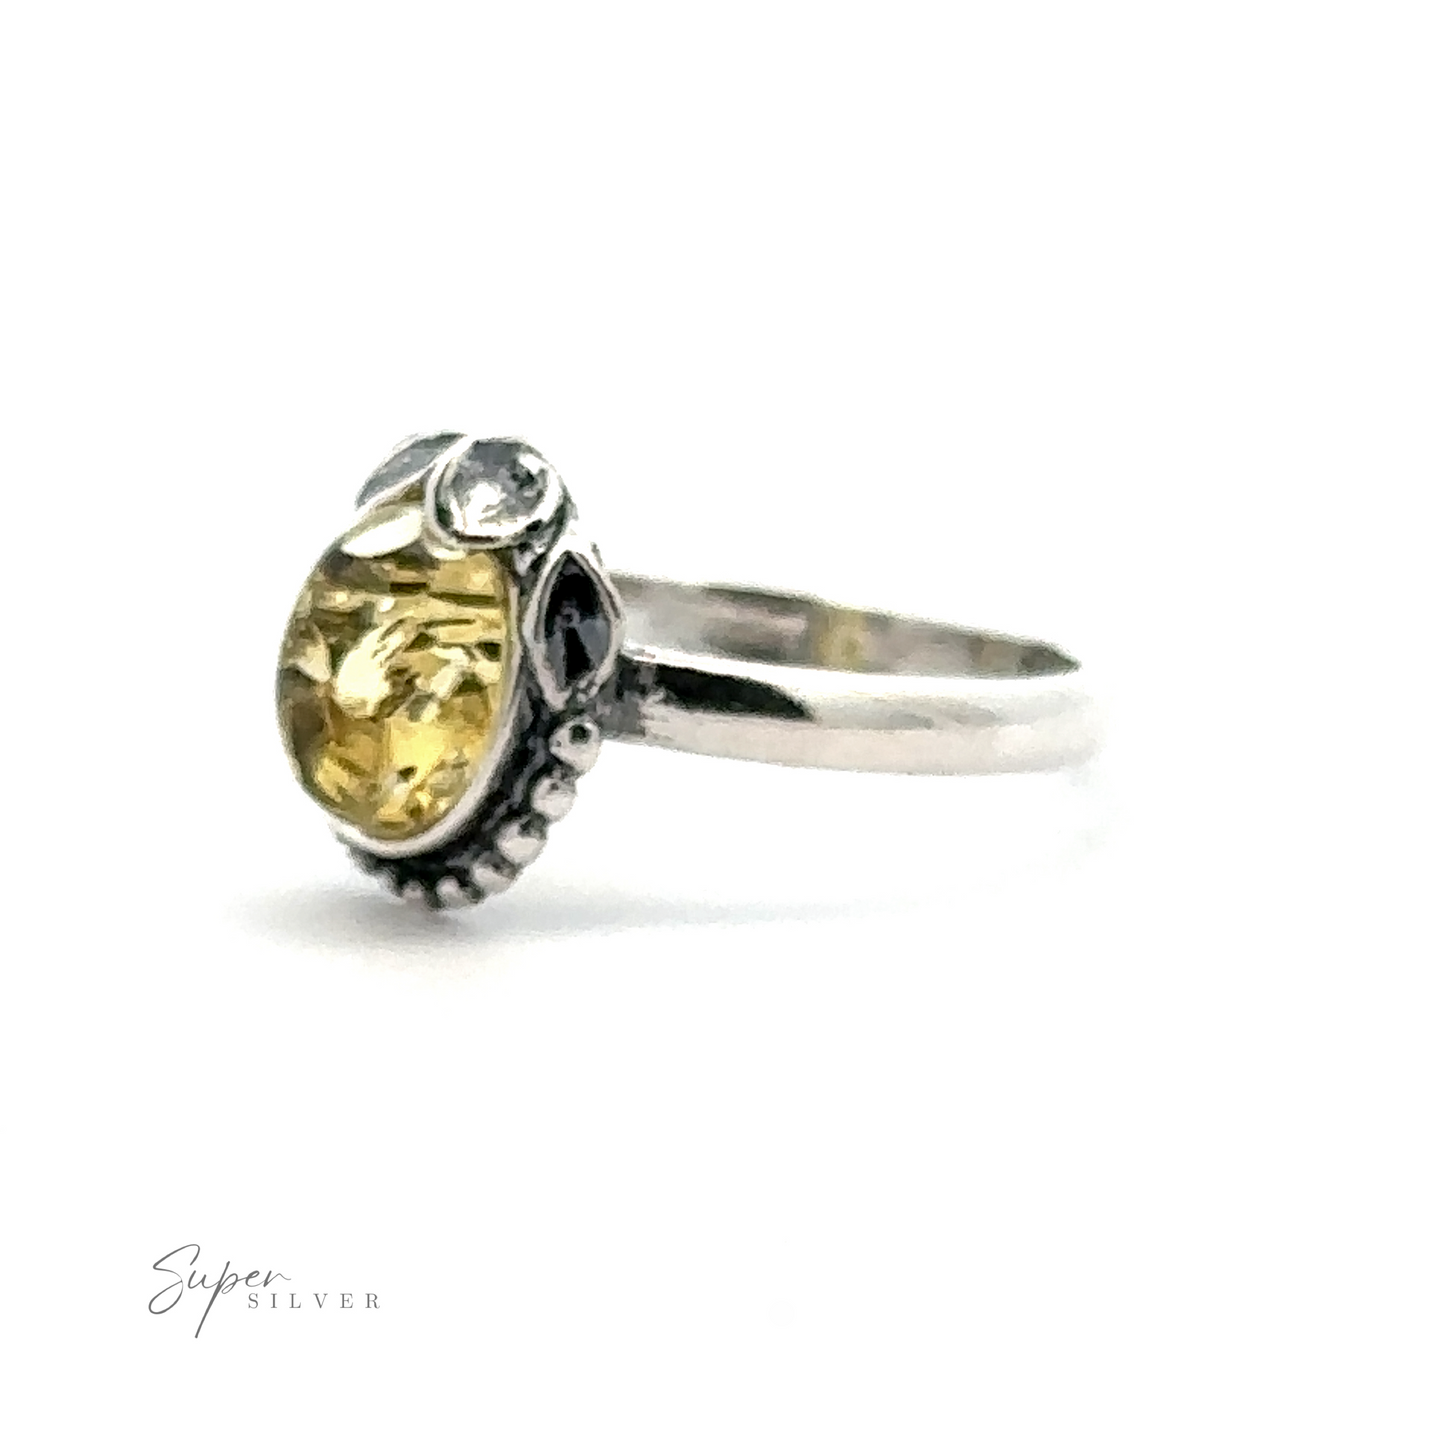 
                  
                    A sterling silver ring featuring a vintage elegance with an oval yellow gemstone in a detailed setting and small decorative elements. The "Amber Ring with Beaded Border and Peace Lily Details" graces the bottom left corner, reflecting nature-inspired jewelry.
                  
                